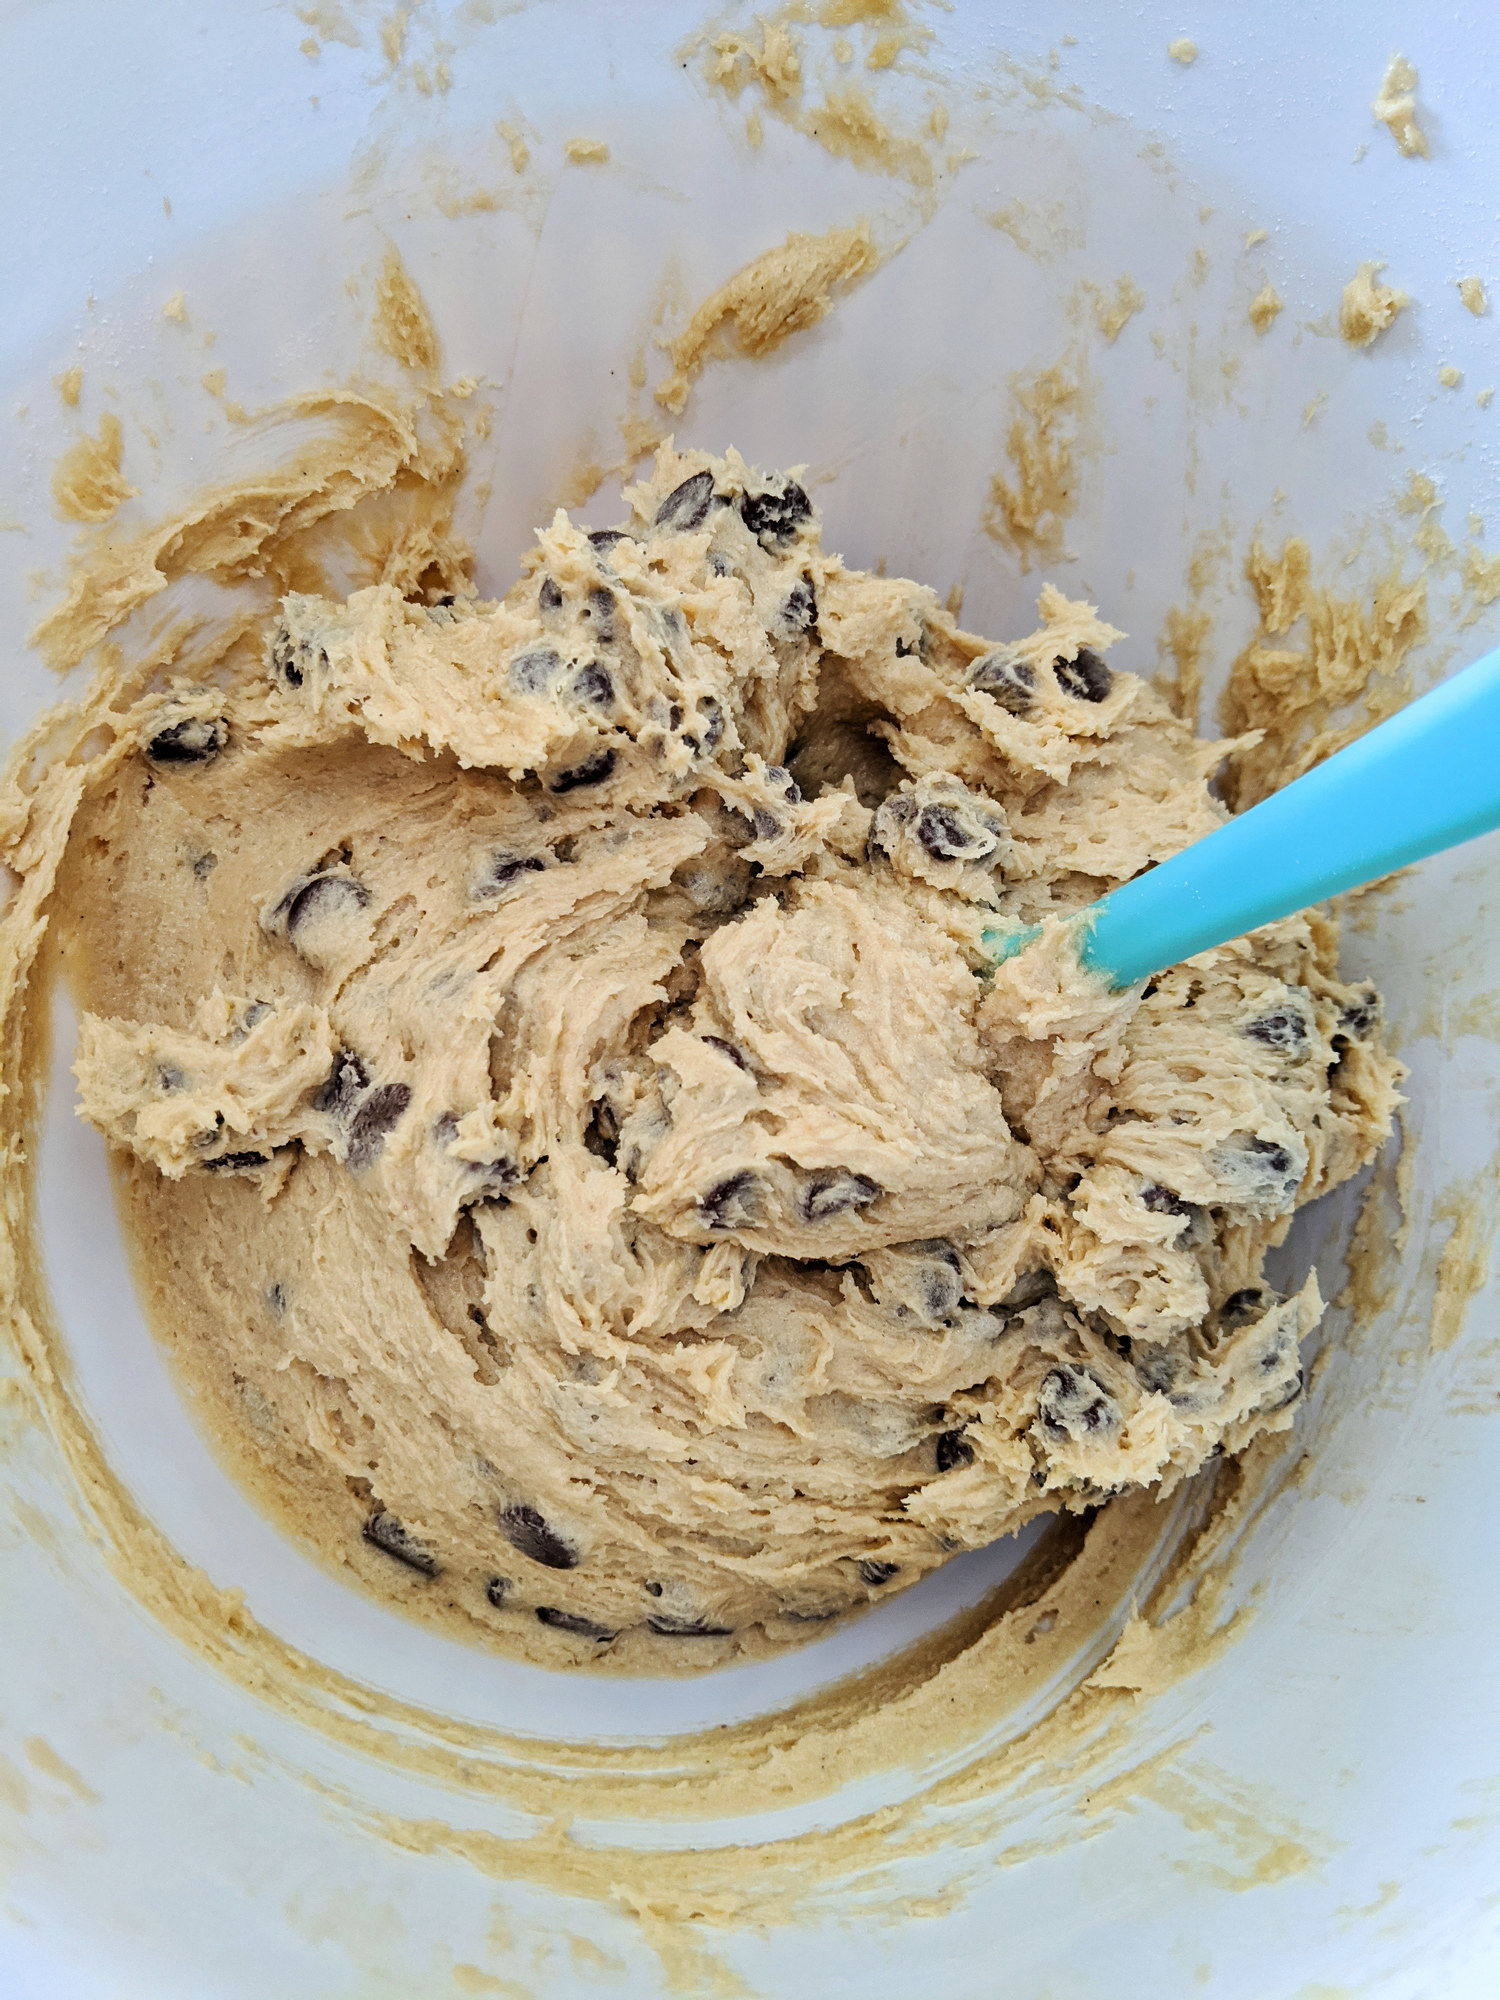 Chocolate chip cookie batter.